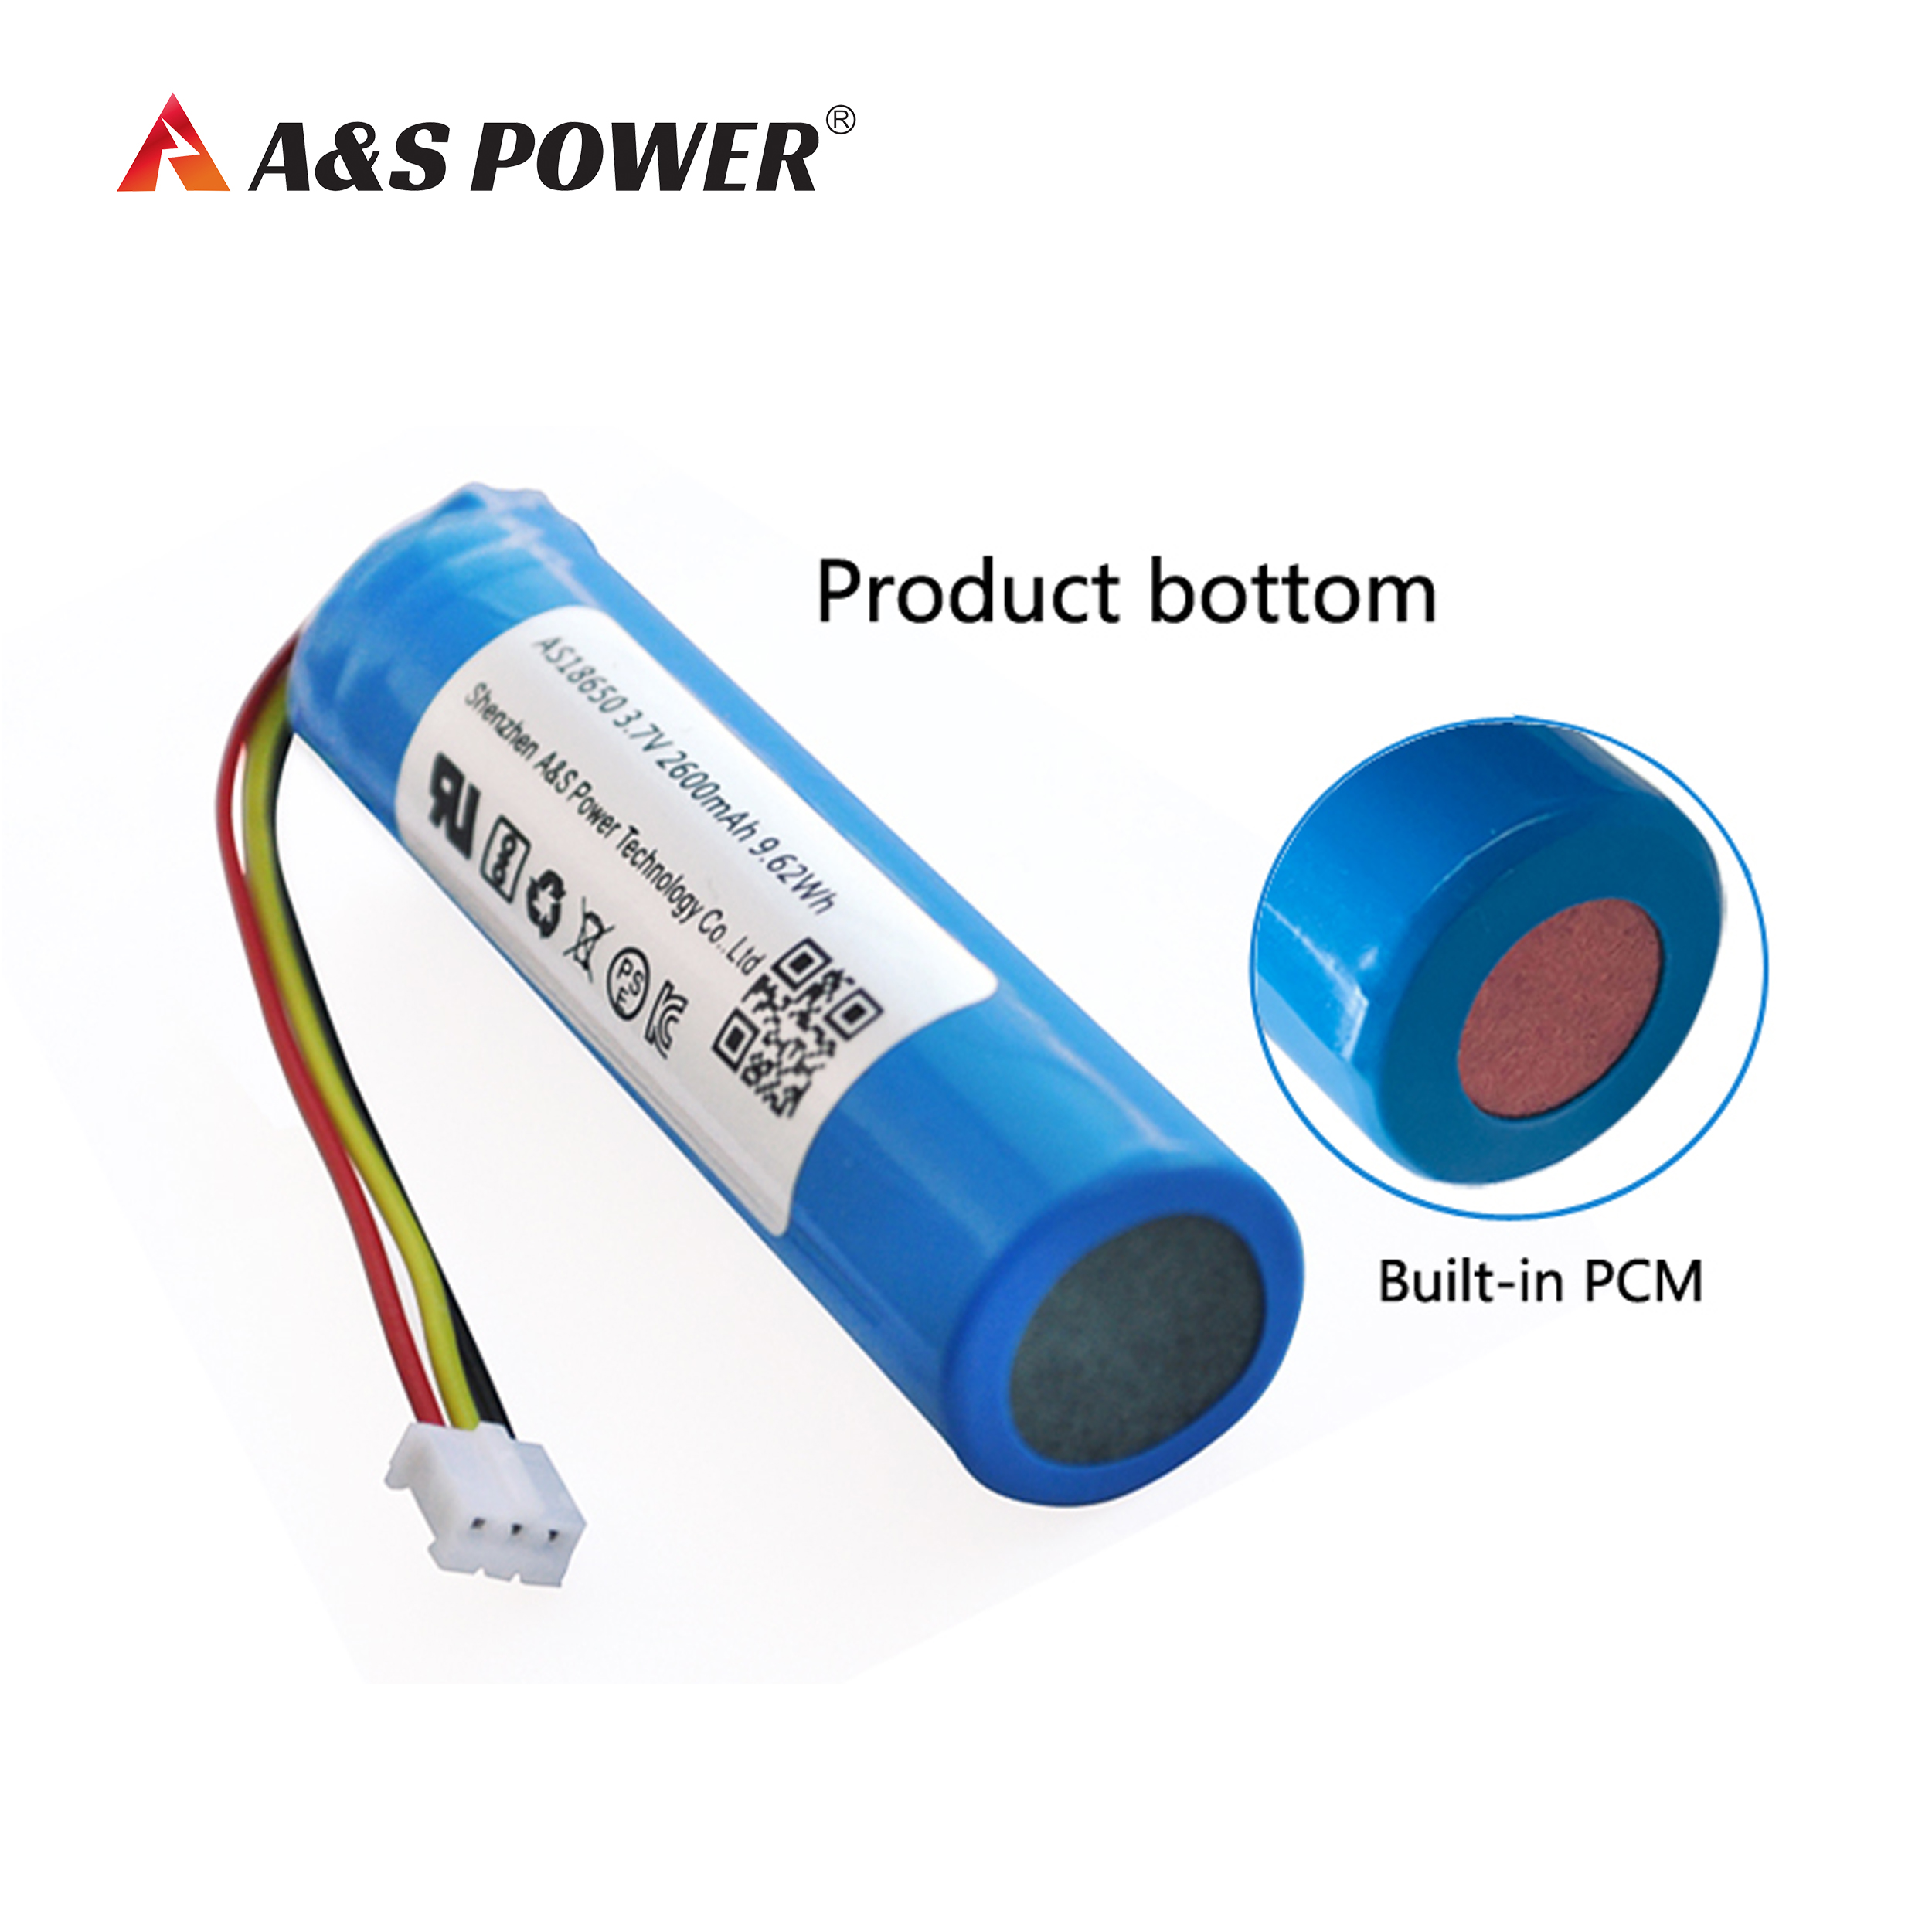 A&S Power 18650 3.7V 2600mAh lithium ion battery